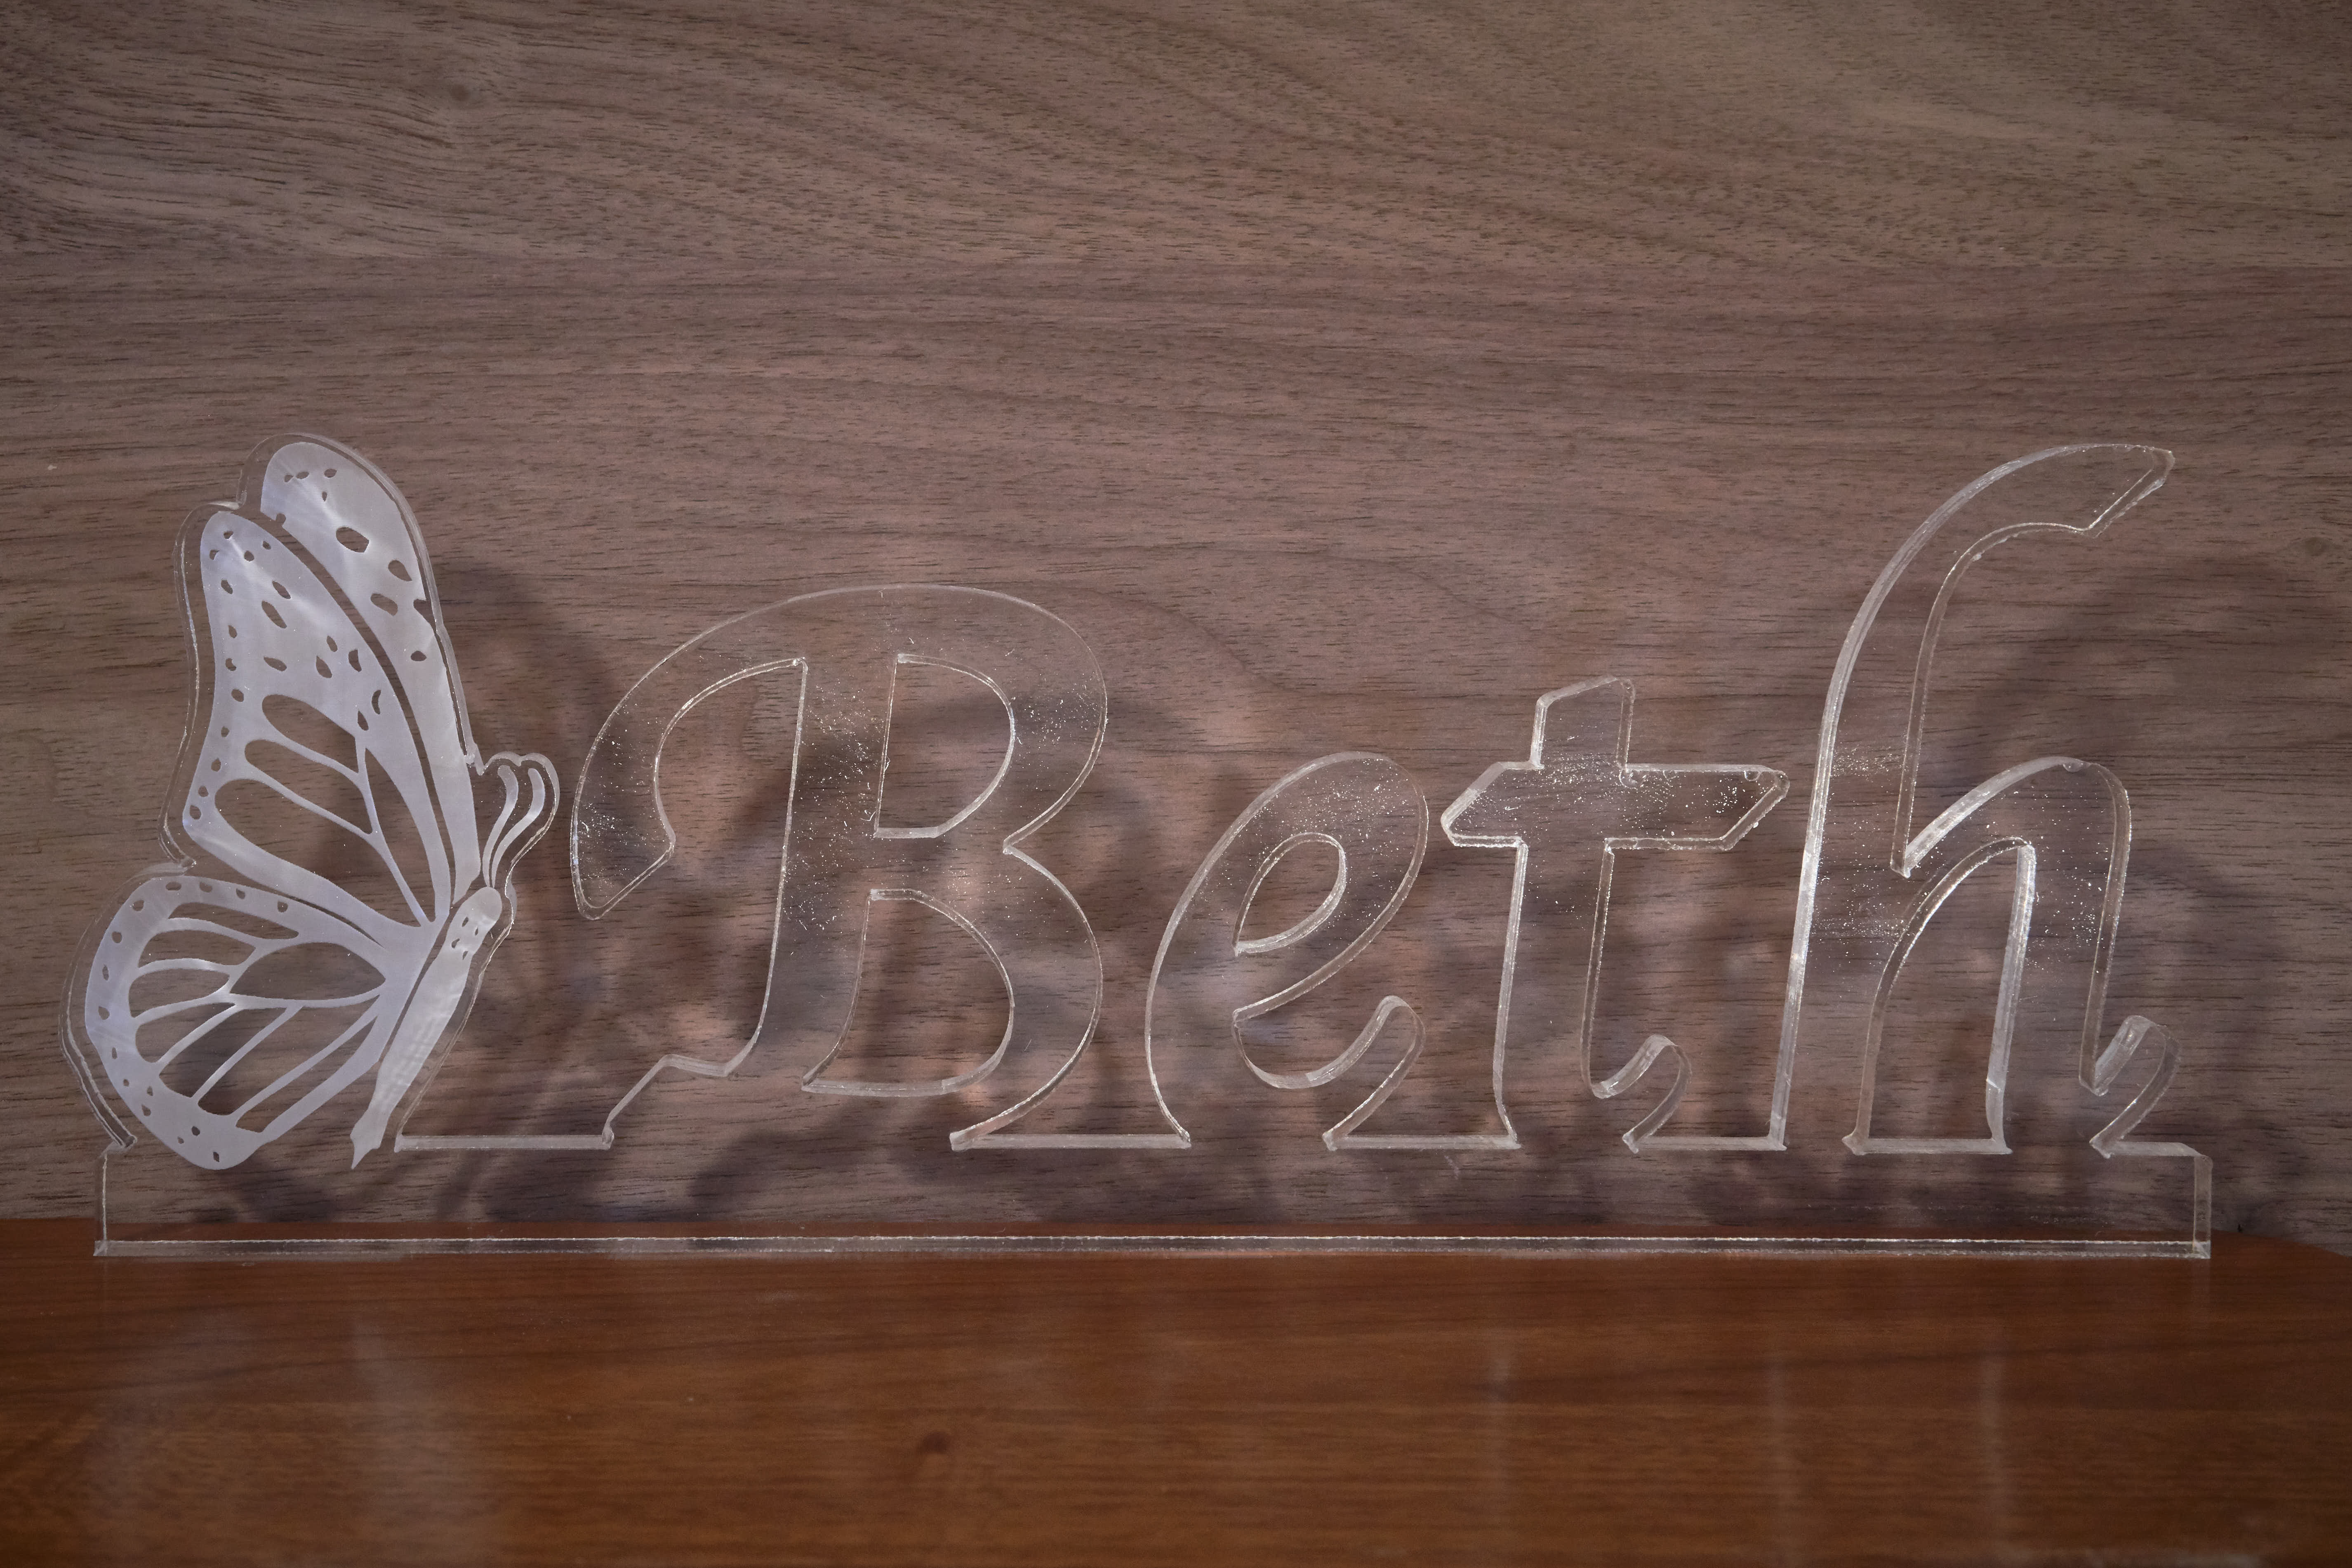 A piece of acrylic engraved with a laser